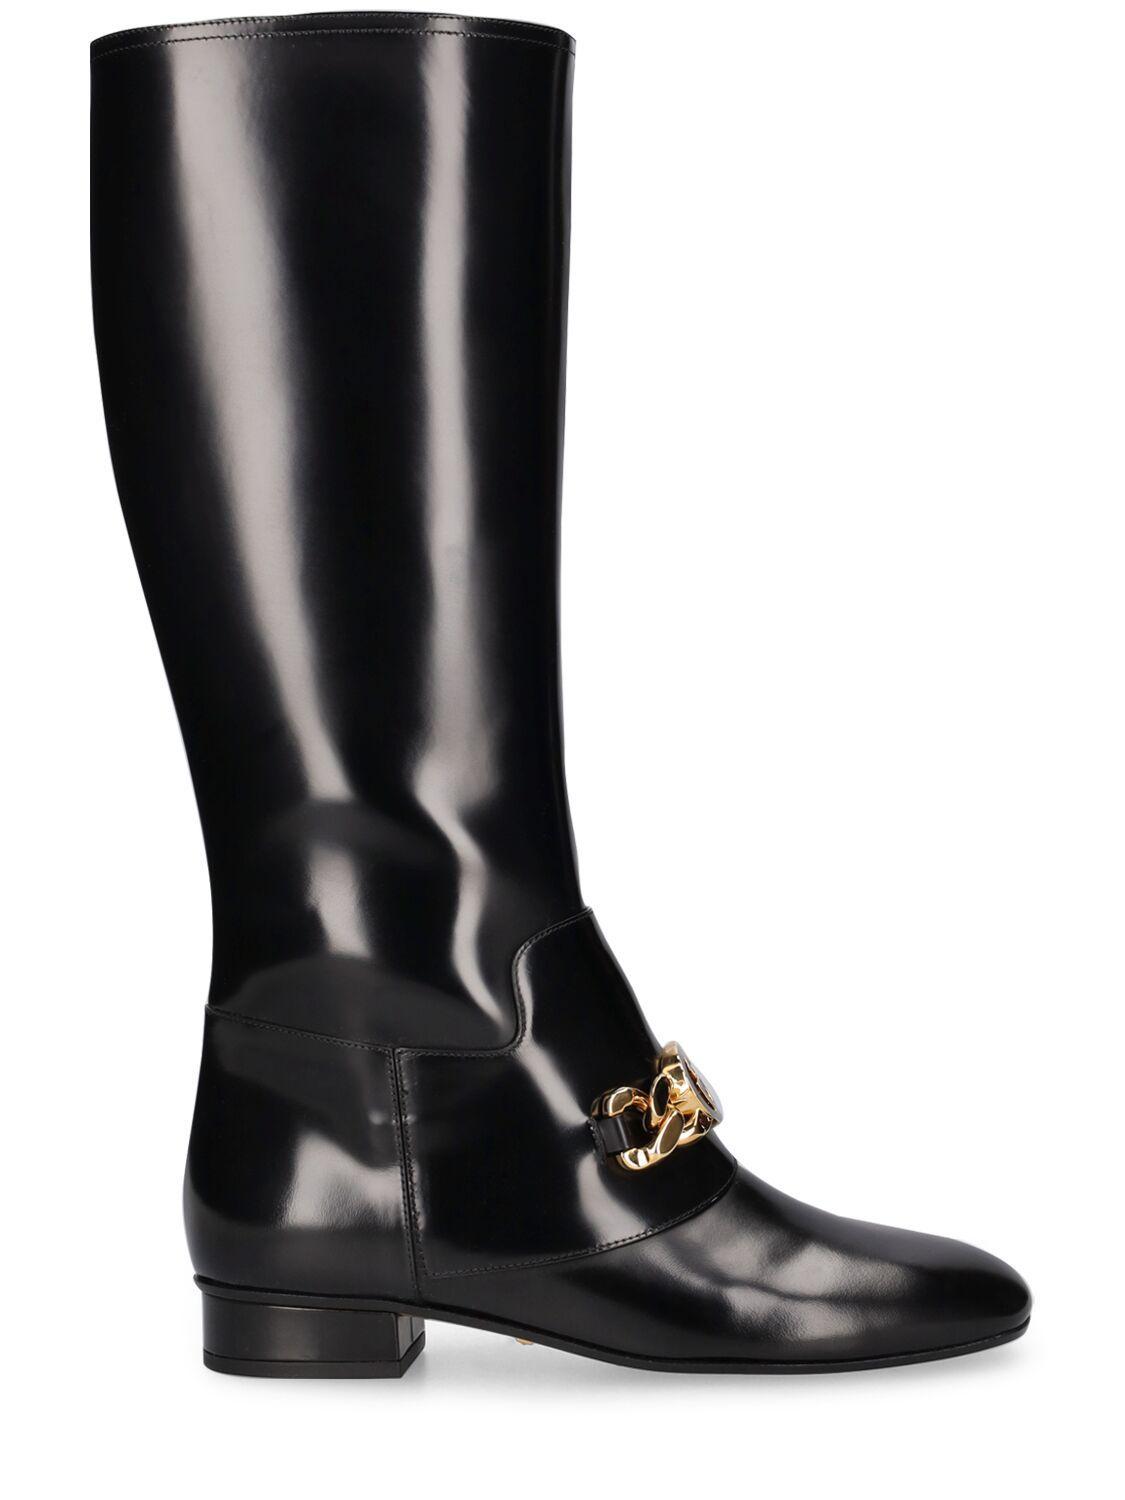 Gucci 25mm Interlocking G Leather Chain Boots in Black | Lyst